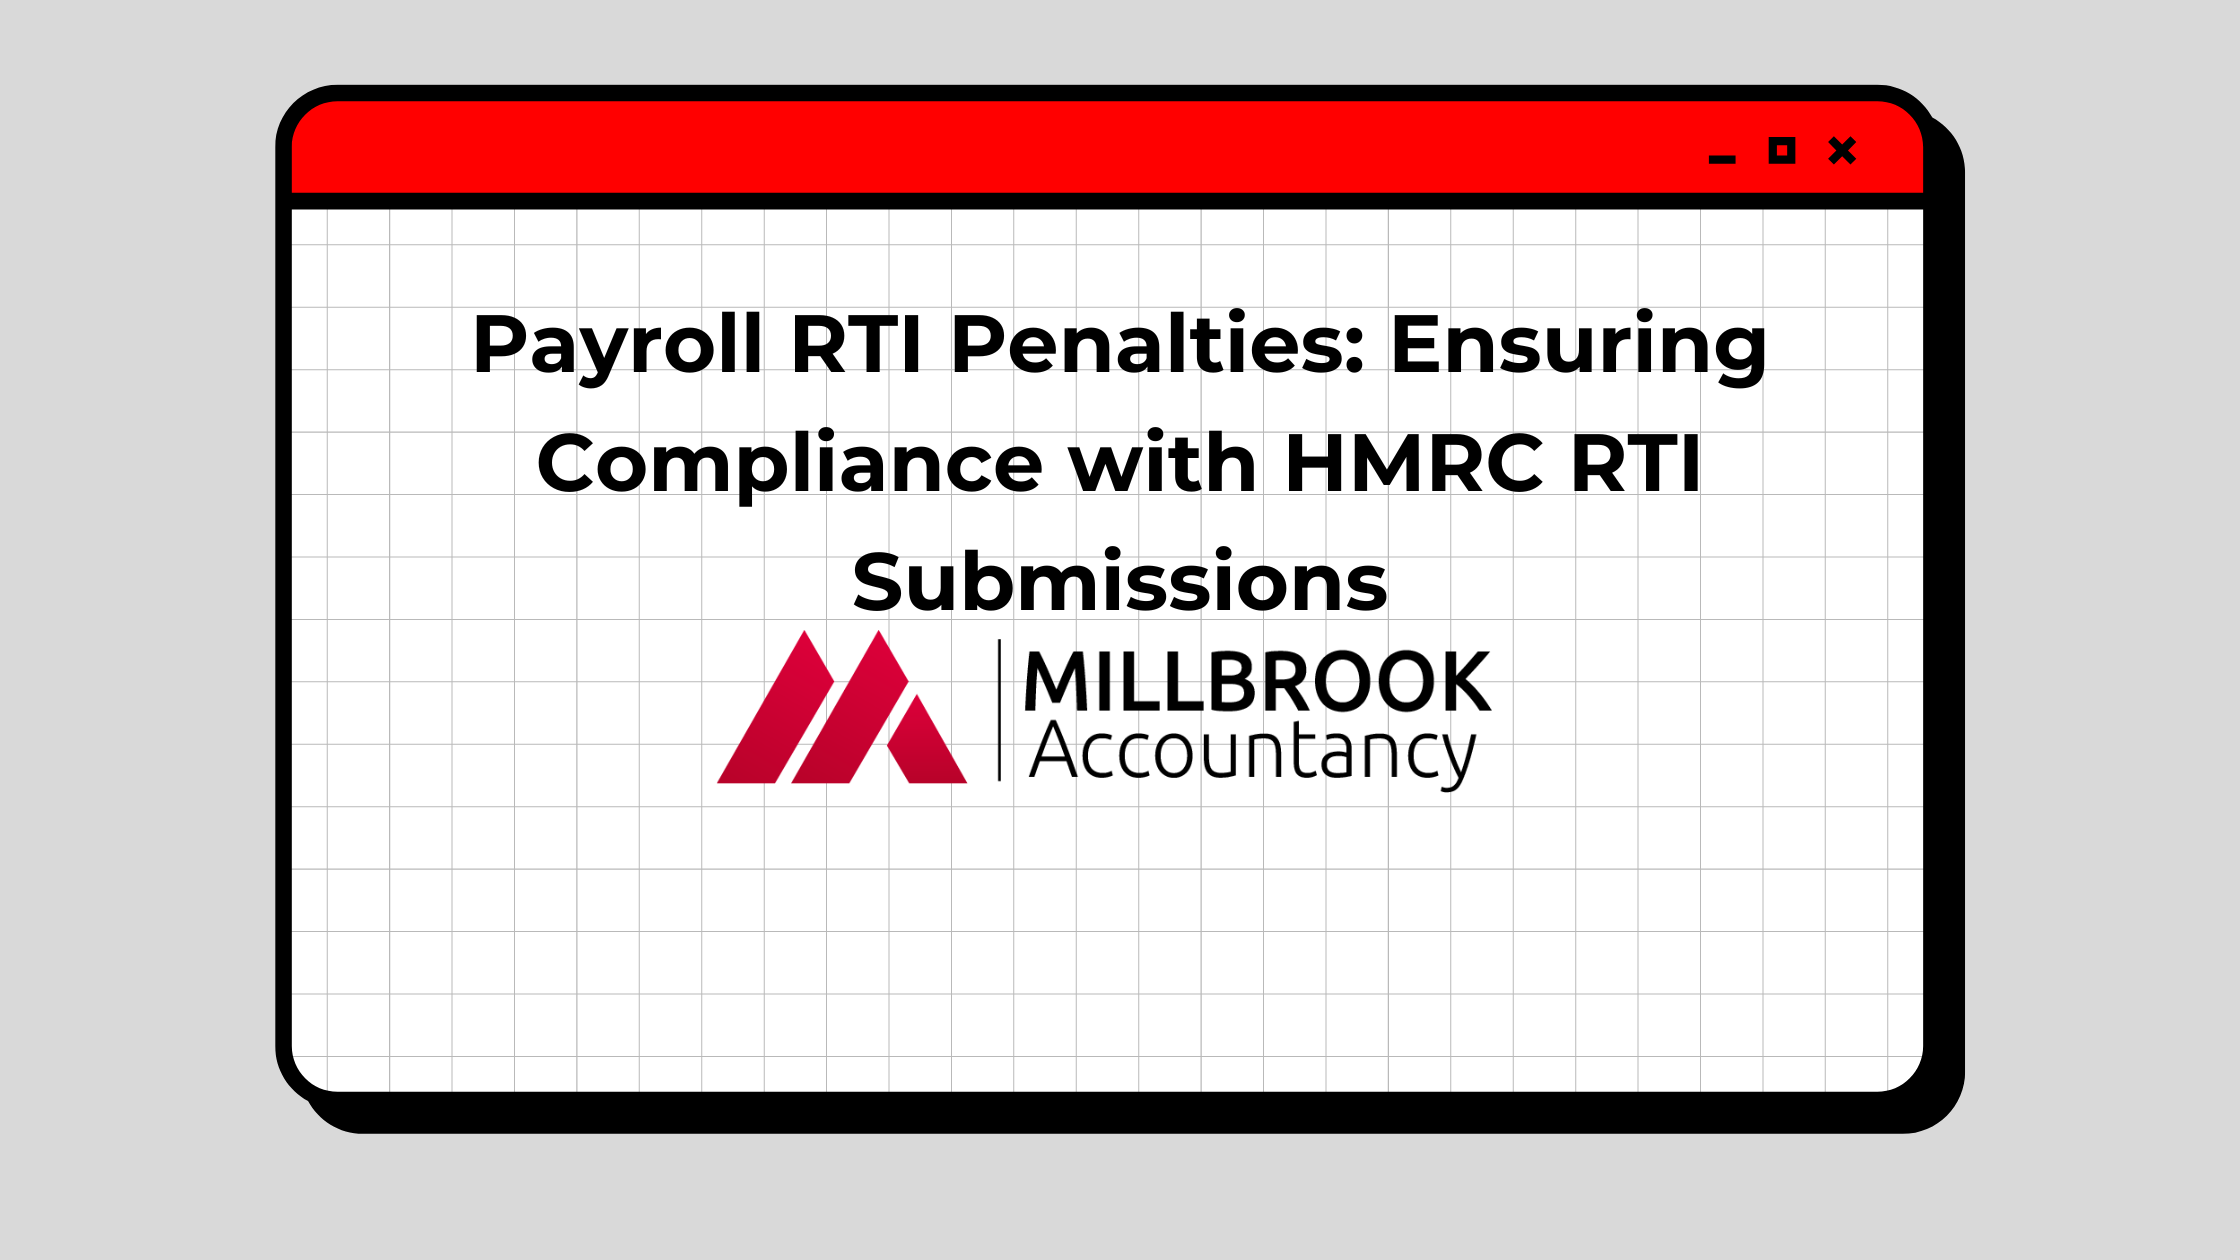 Payroll RTI Penalties: Ensuring Compliance with HMRC RTI Submissions